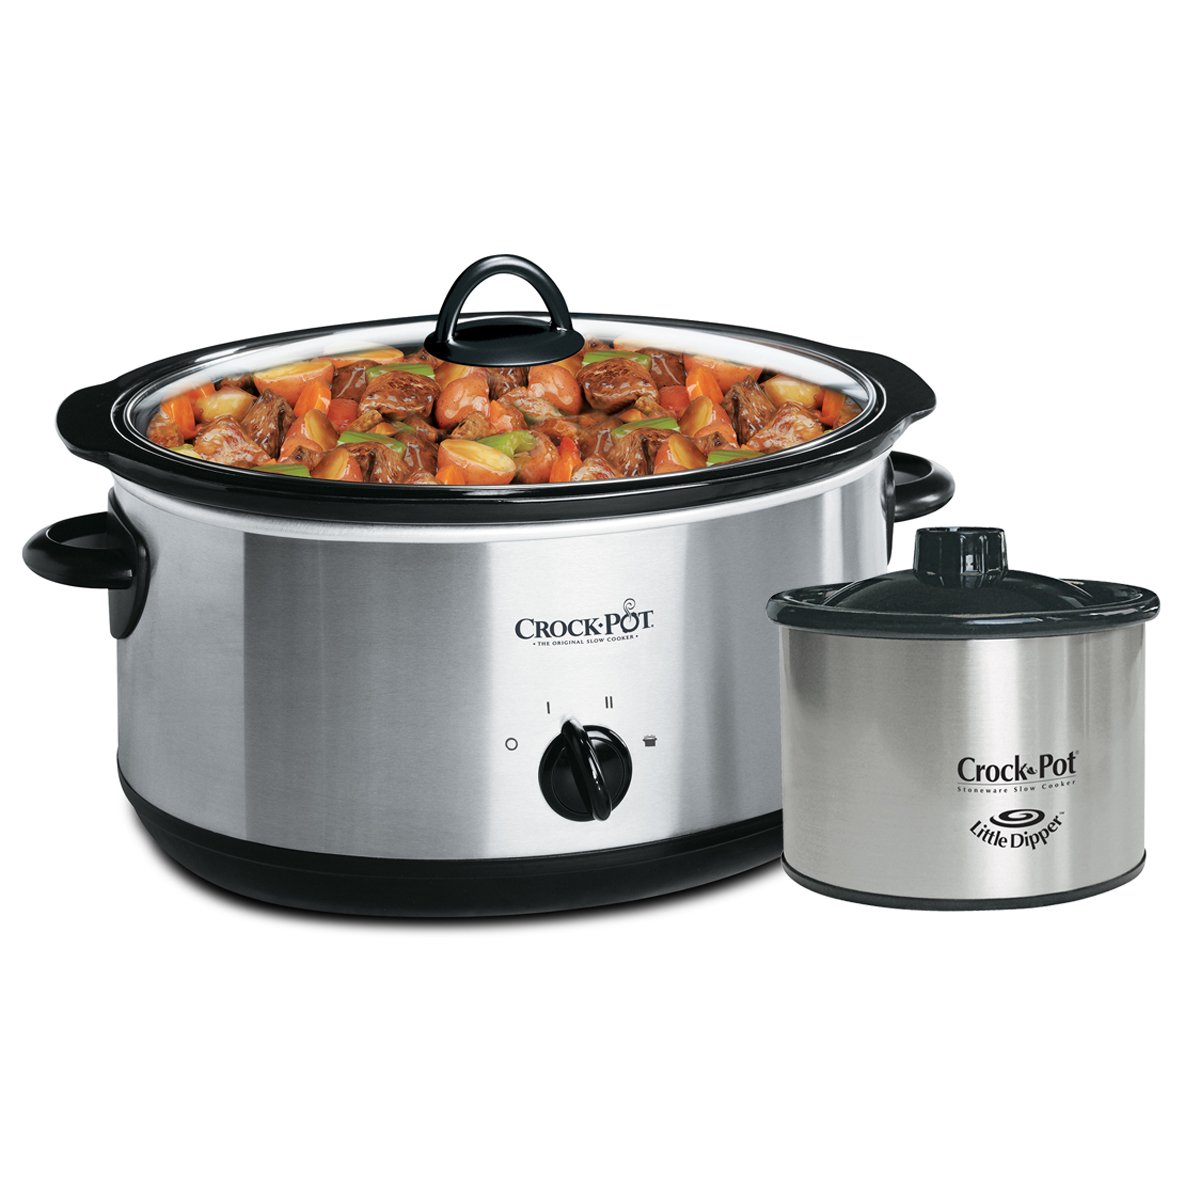 Crock Pot 8qt Oval Manual Slow Cooker With Little Dipper Food Warmer Stainless Scv803ss 033 Crock Pot Canada